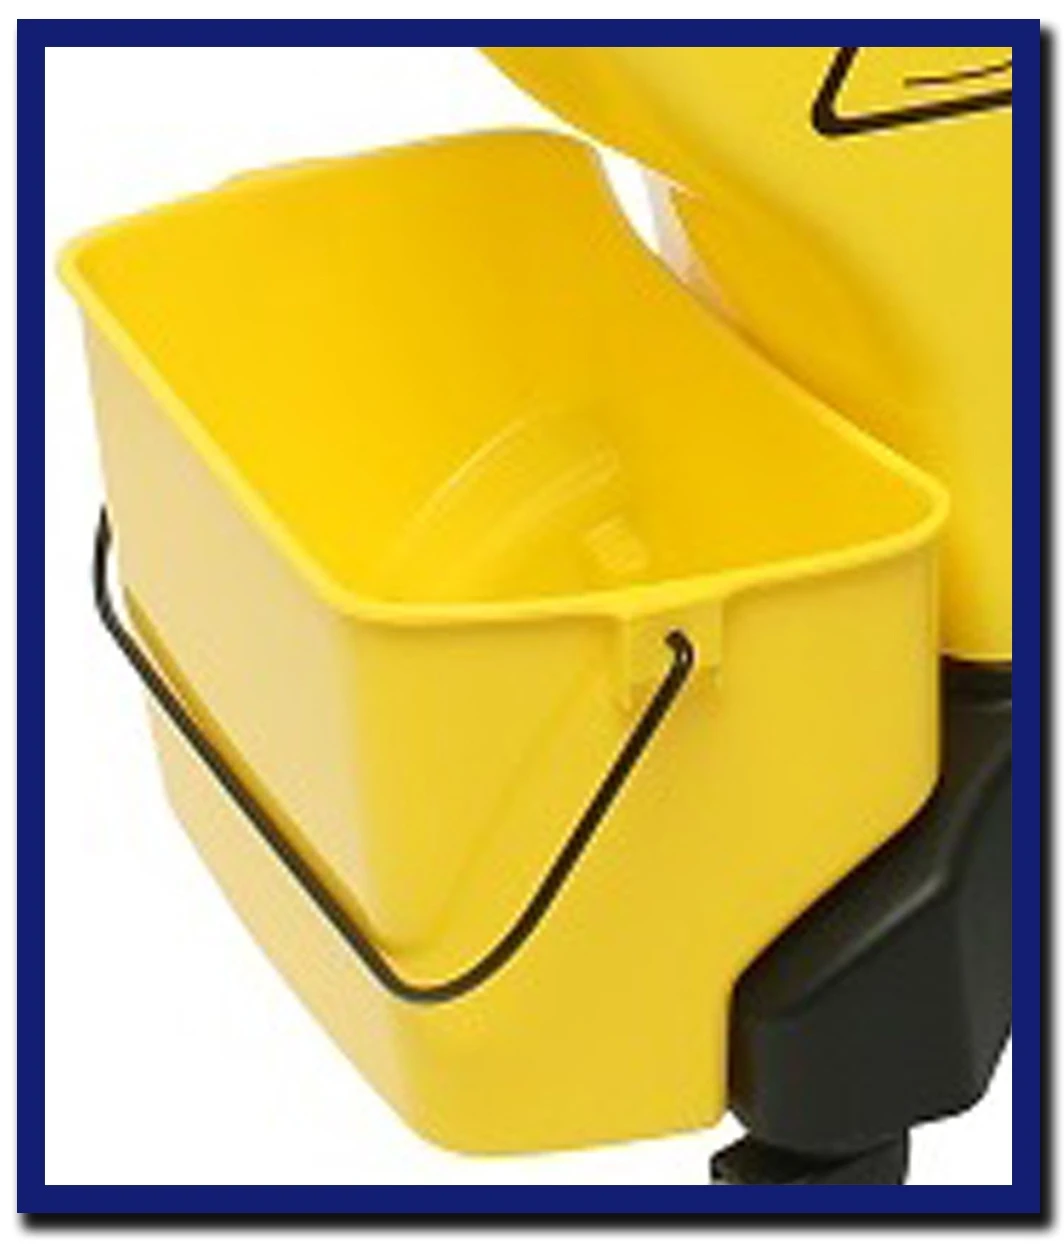 Edco Enduro Press Small Buckets - 1 Unit - Stone Doctor Australia - Cleaning Accessories > Mopping > Buckets